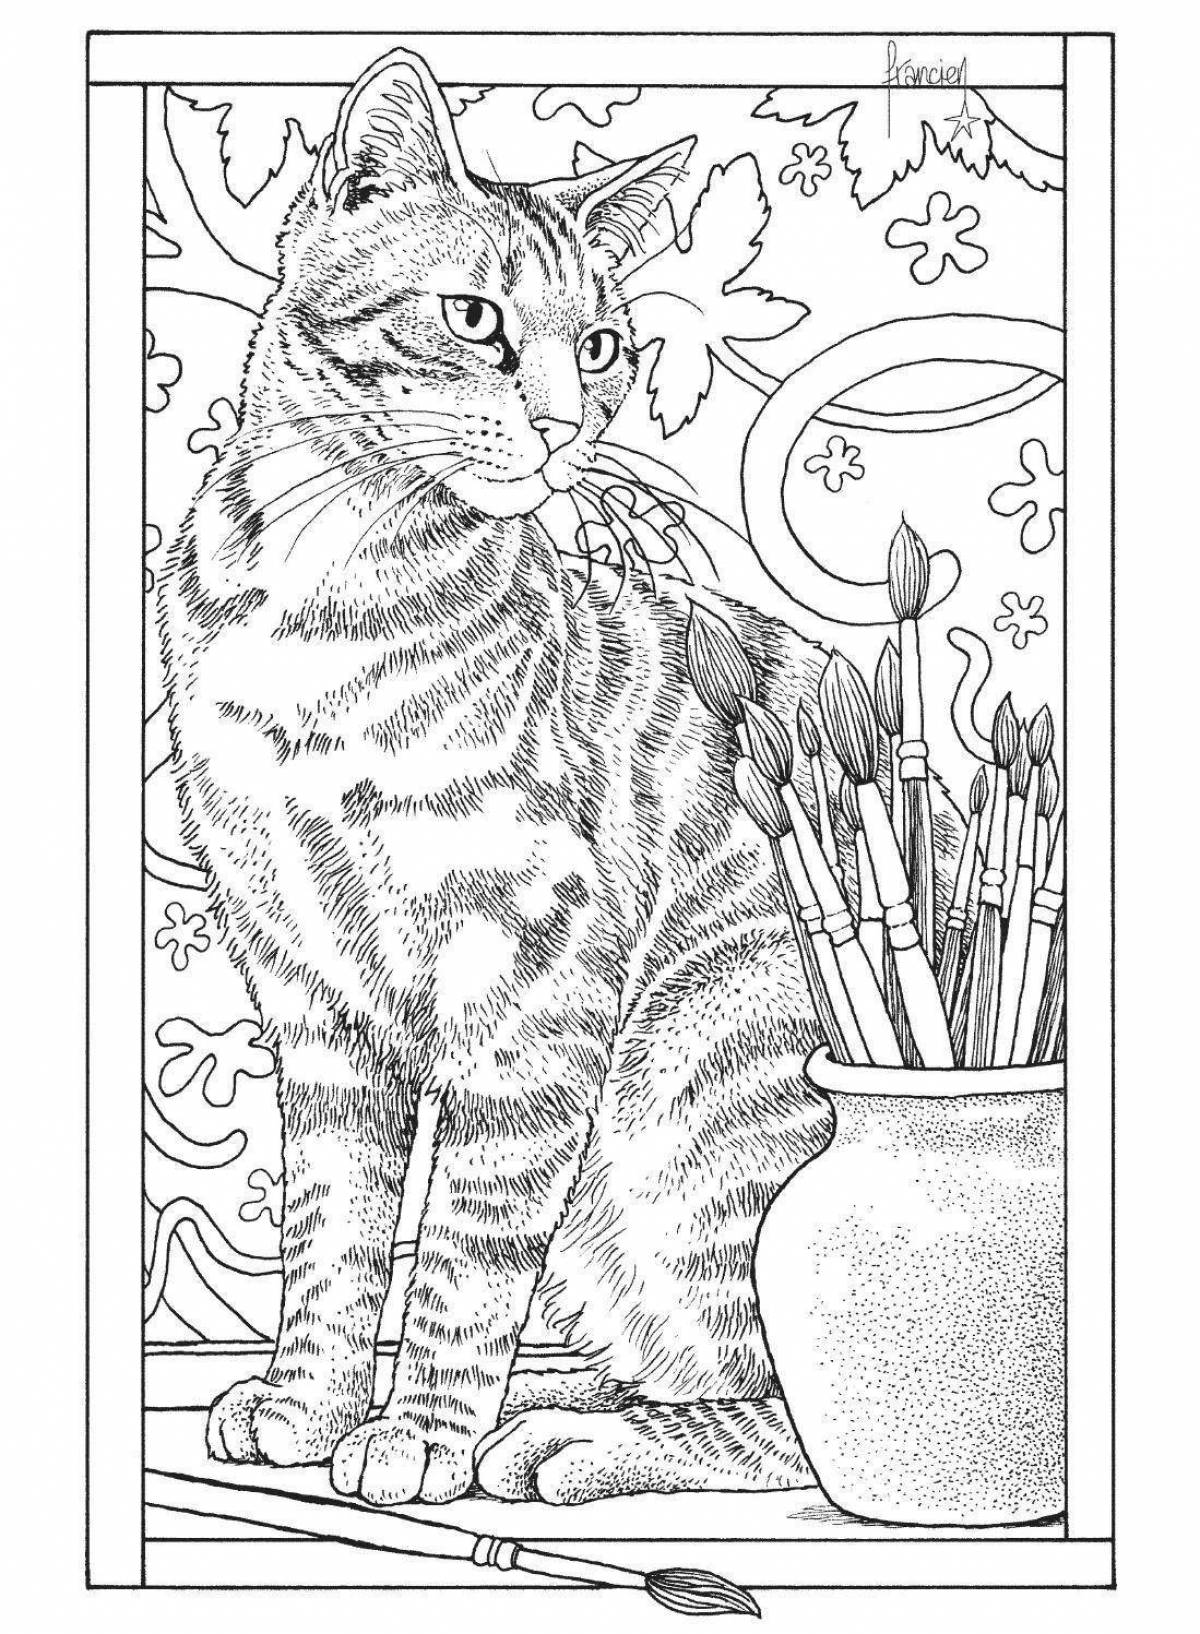 Exalted coloring book for girls 12 years old - cats